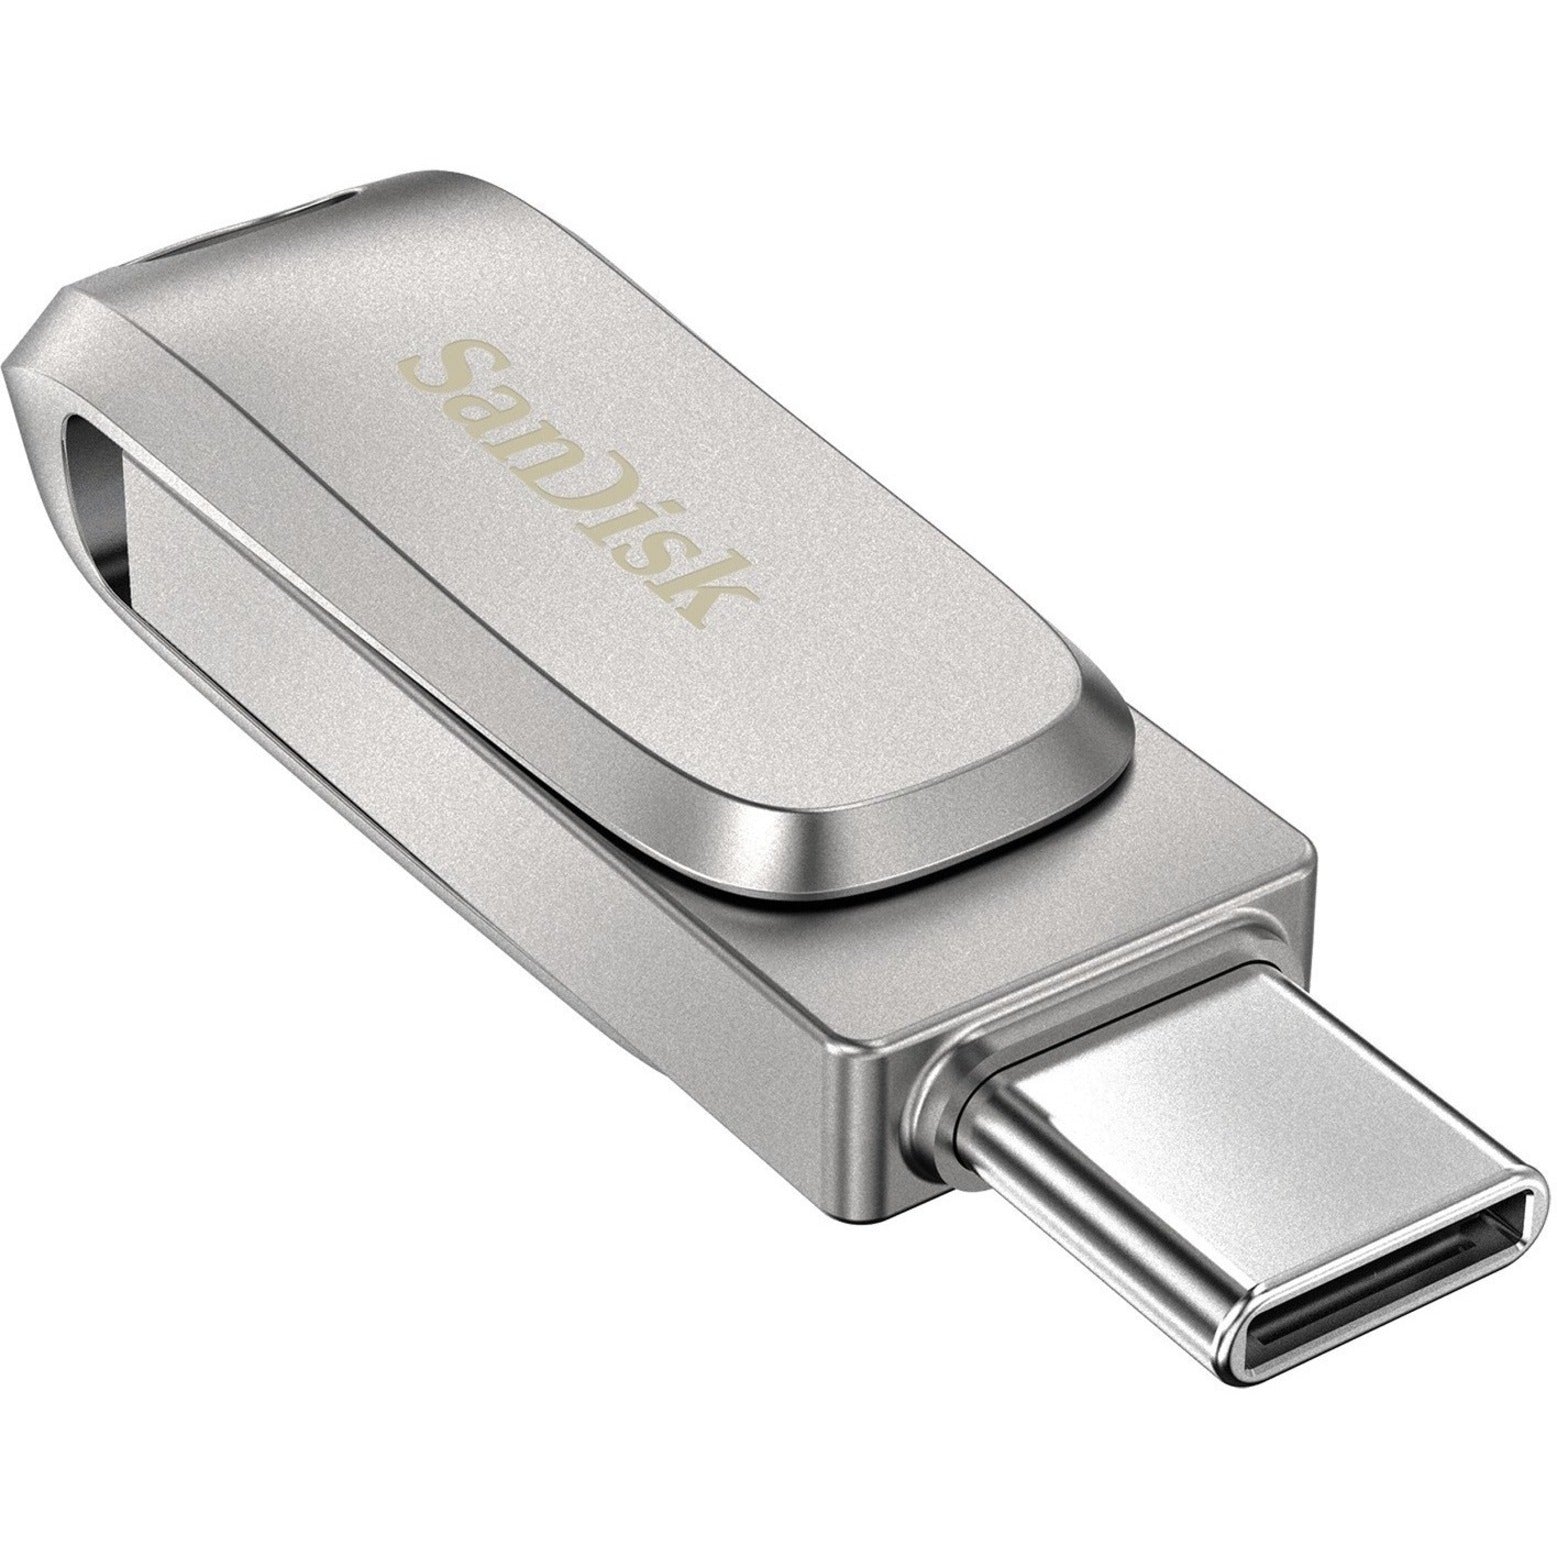 SanDisk SDDDC4-128G-A46 Ultra Dual Drive Luxe USB Type-C - 128GB, High-Speed Data Transfer and Storage